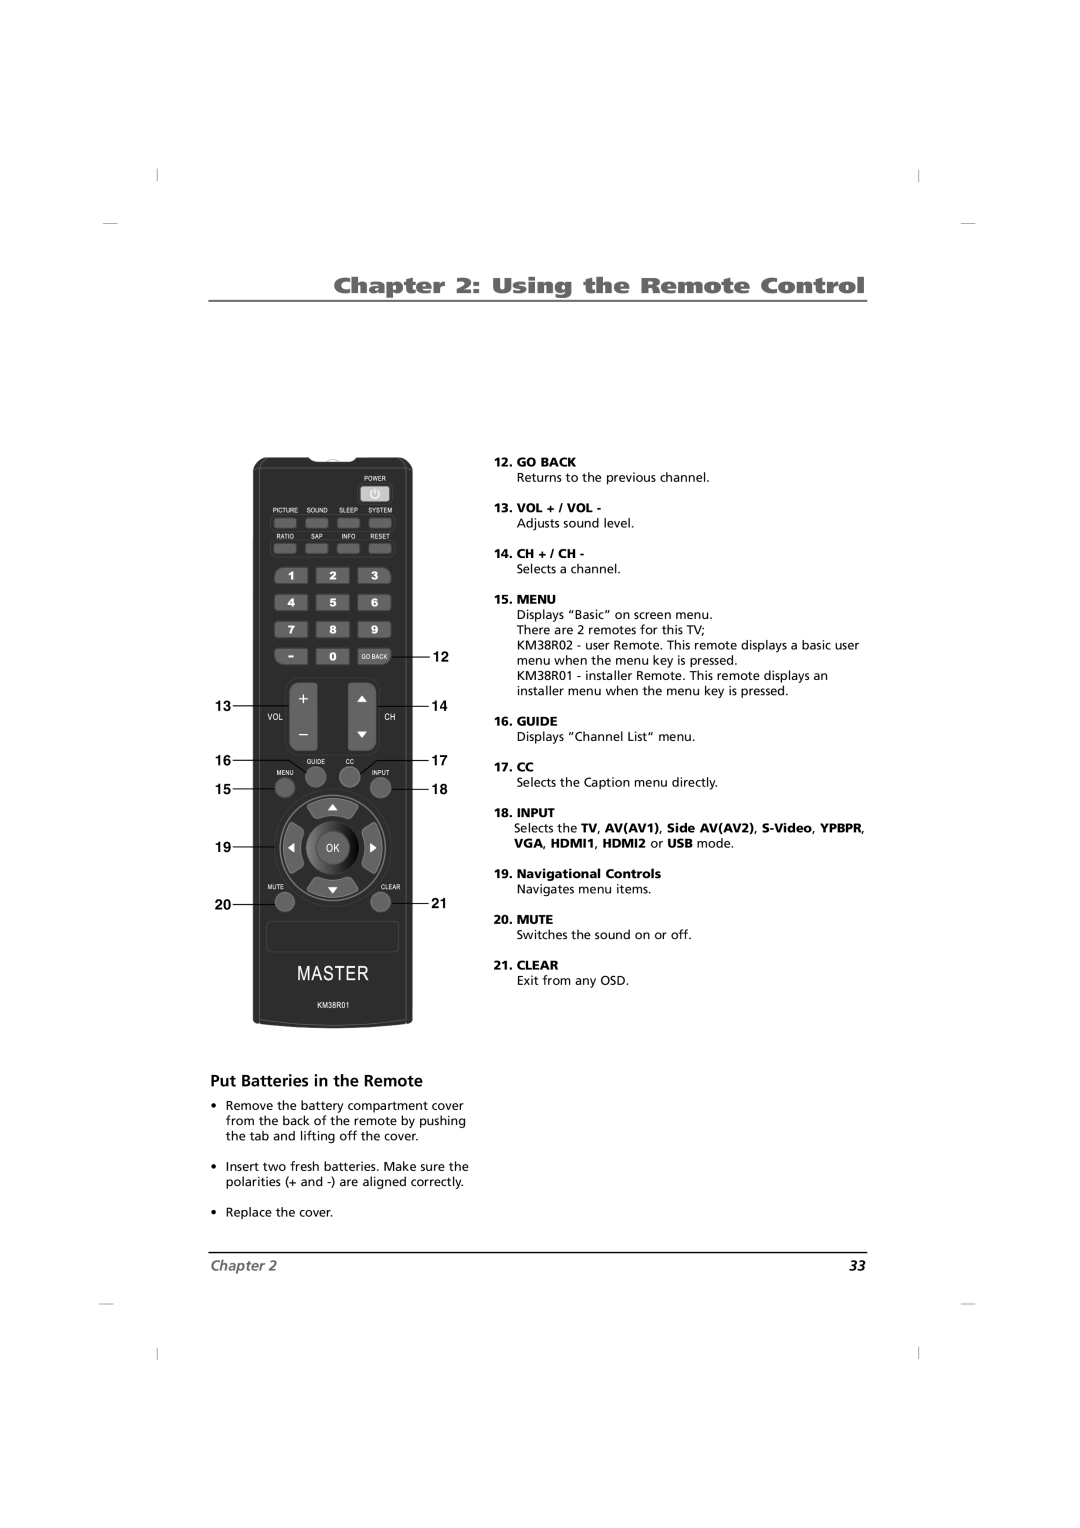 RCA J32HE720, J42HE820, J26HE820 manual Put Batteries in the Remote, Using the Remote Control, Chapter 